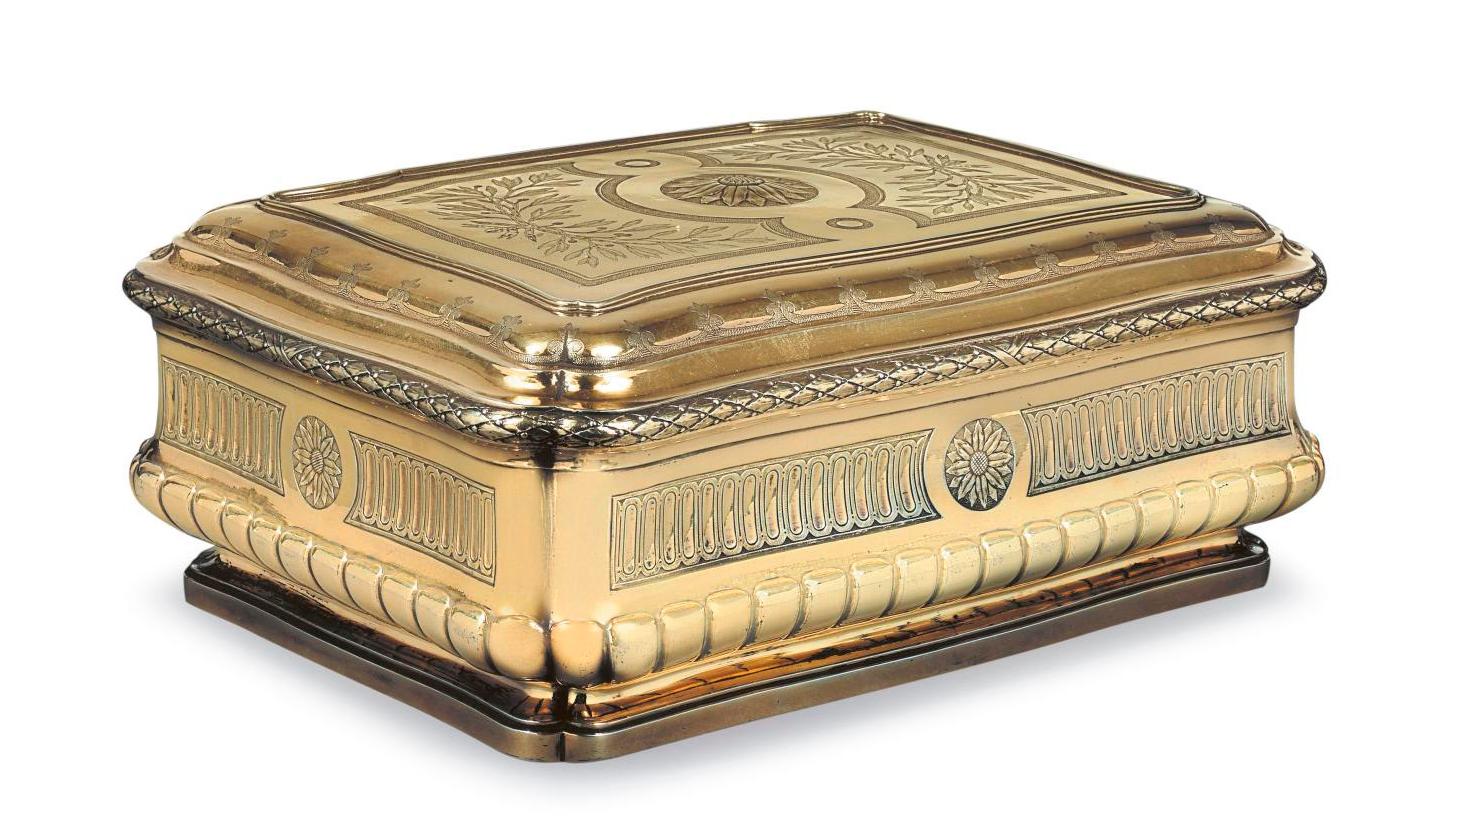 Robert-Joseph Auguste, admitted as master in 1757, rectangular vermeil toiletry box... A Collector's Marvels in Vermeil from the 17th and 18th centuries